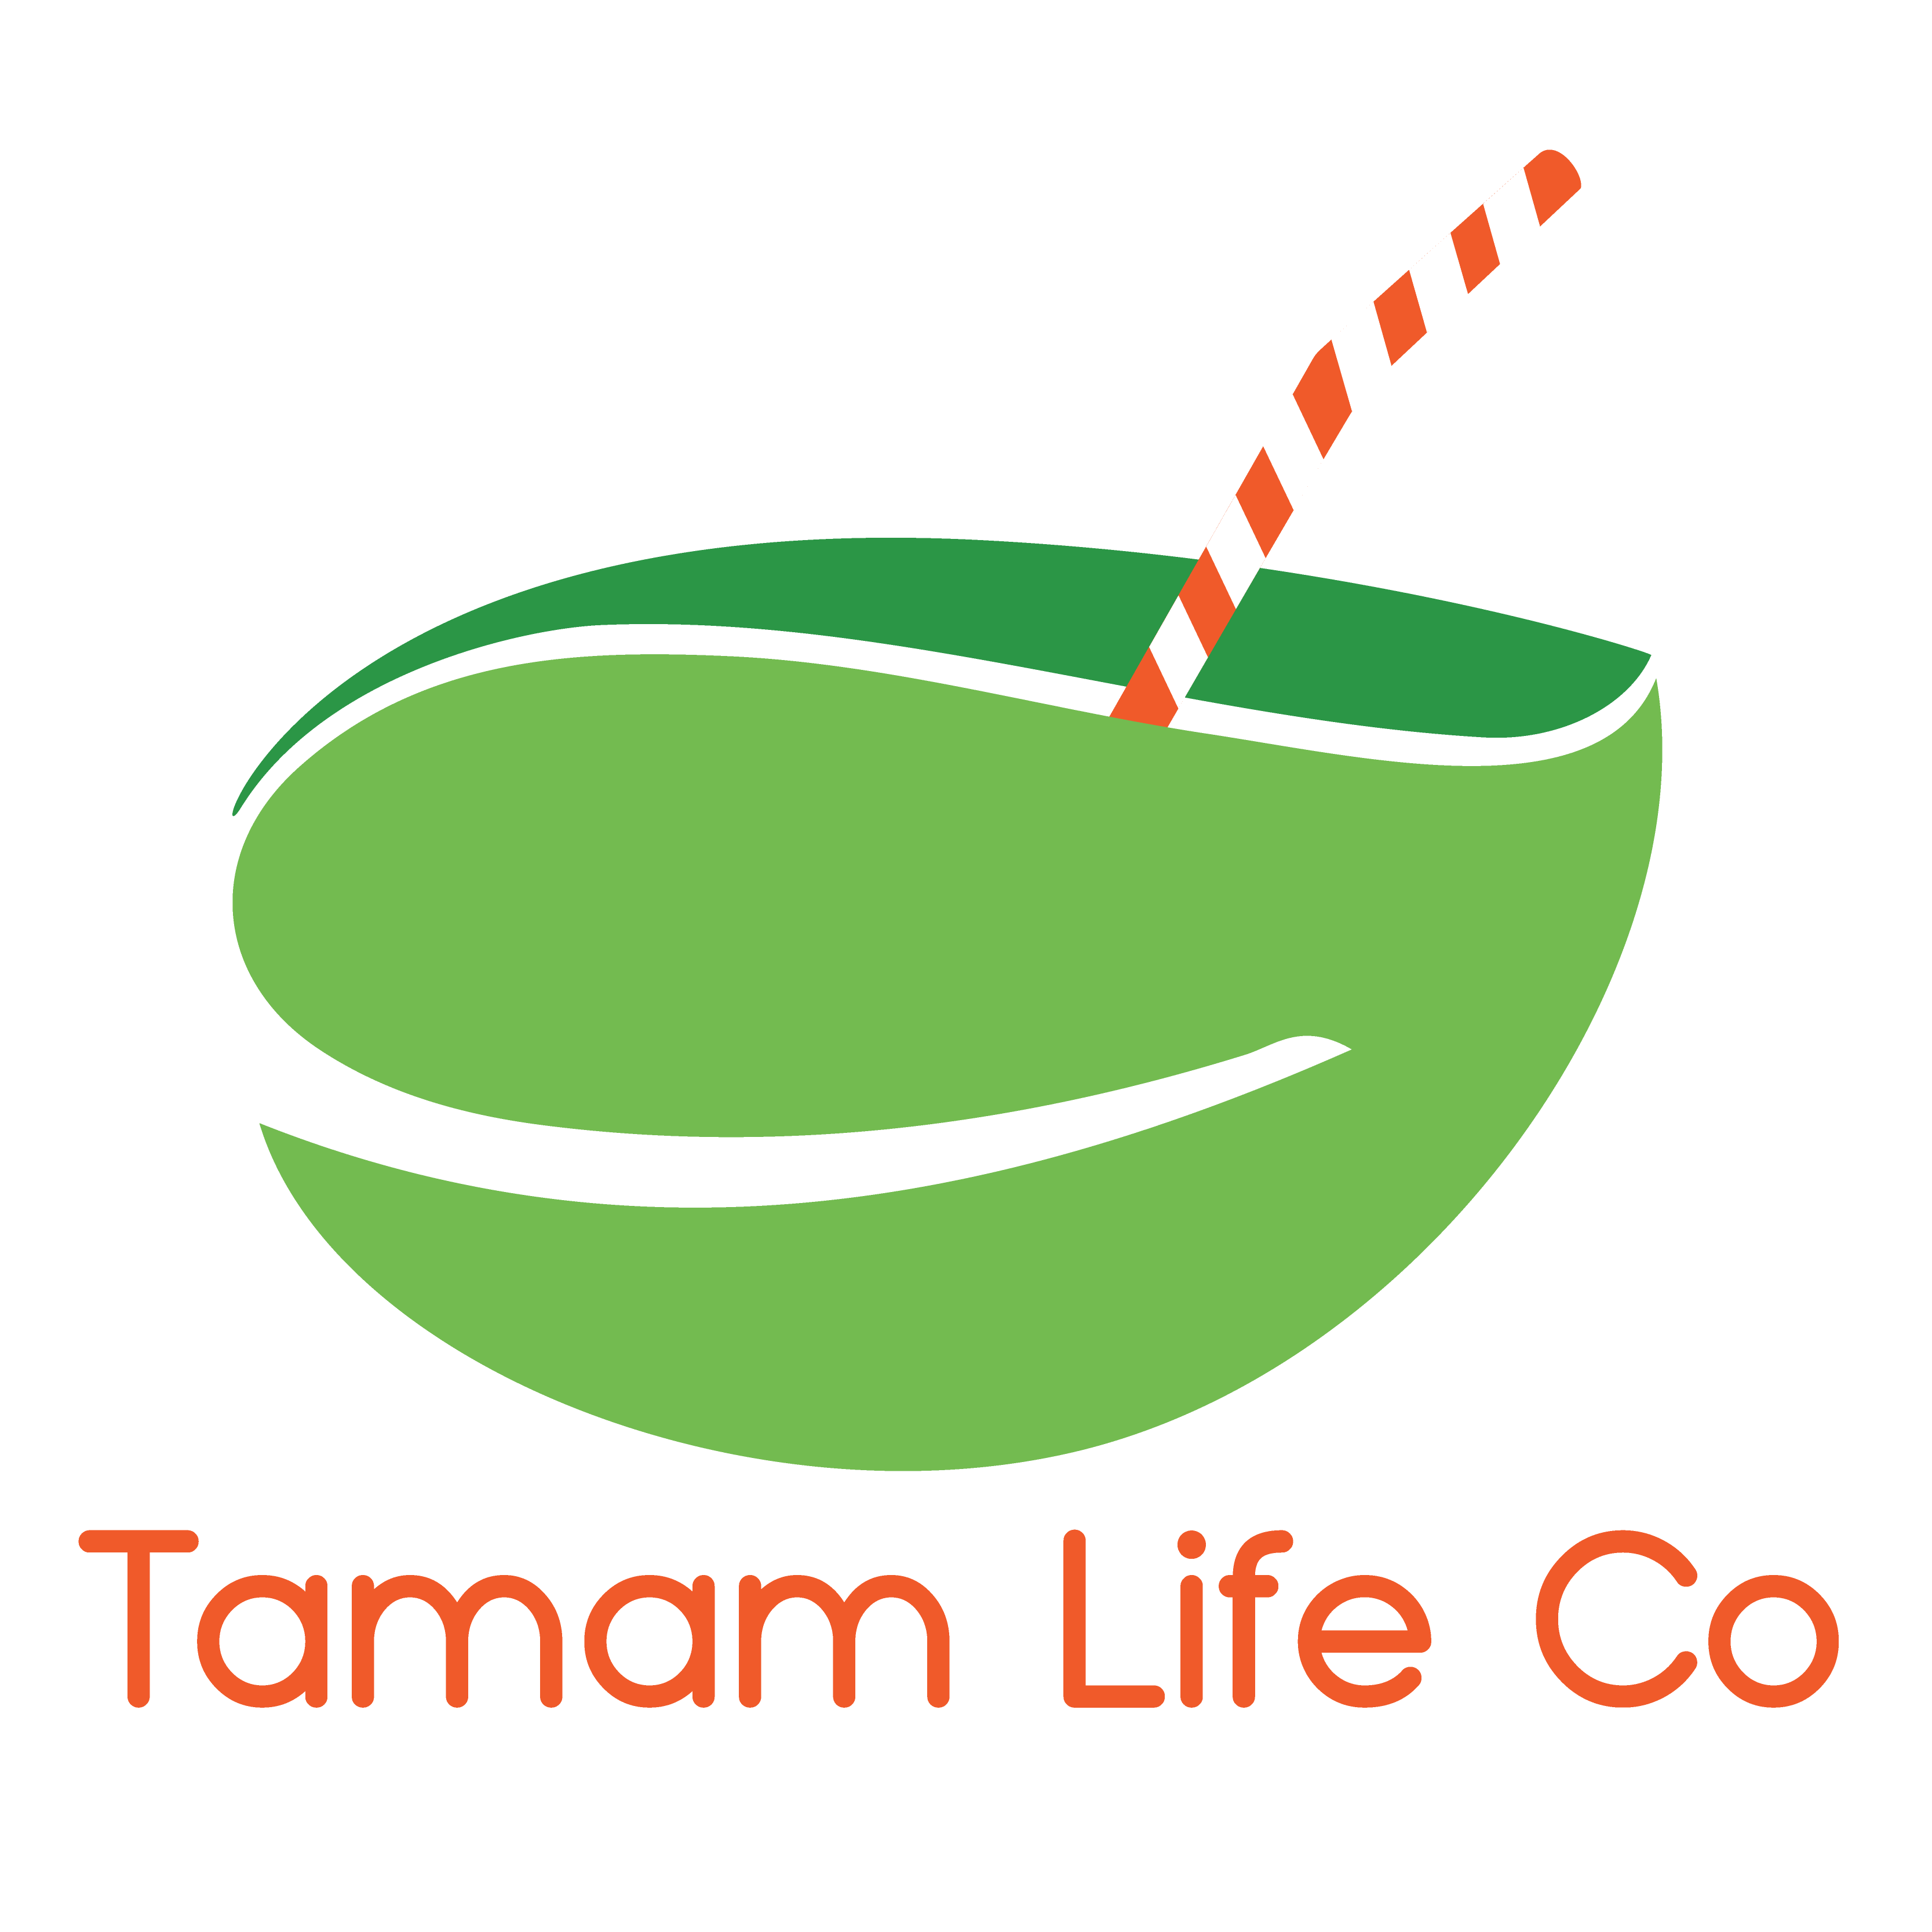 Montgomery County Food Bank Partners with Health and Wellness Company Tamam Life to Sponsor Its Outrun Hunger Event for 11th Most Populated County in Texas